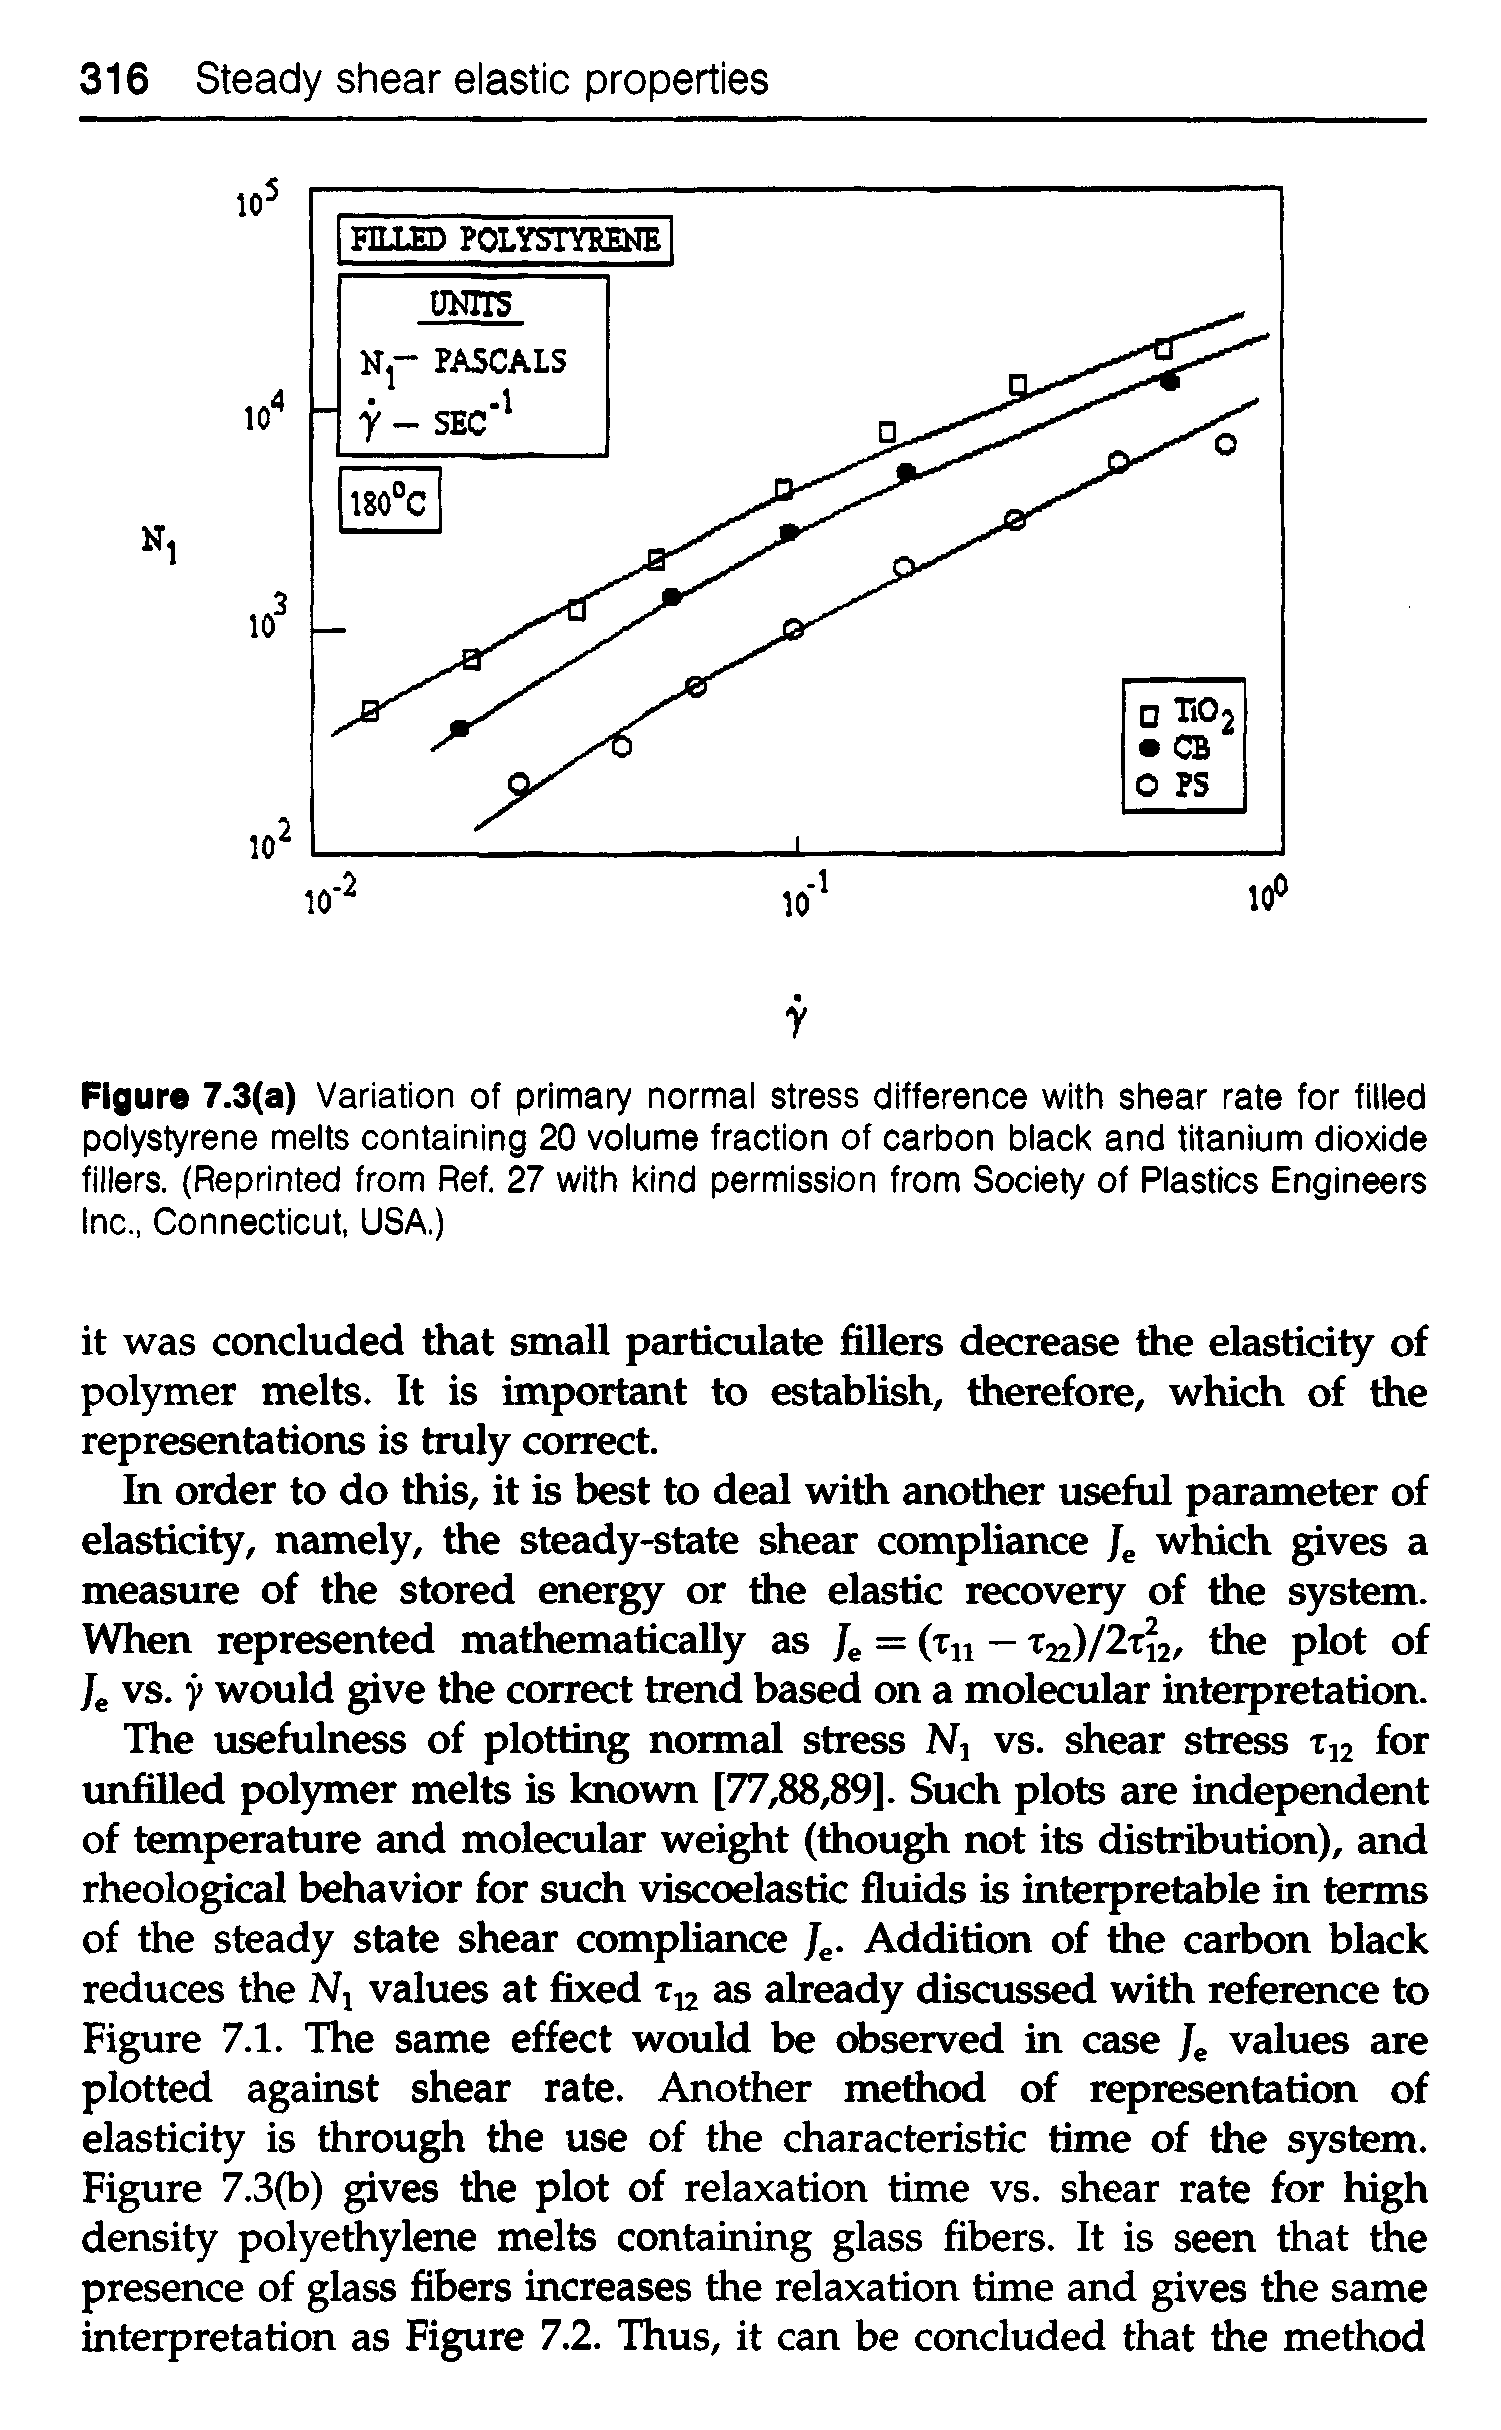 Figura 7.3(a) Variation of primary normal stress difference with shear rate for filled polystyrene melts containing 20 volume fraction of carbon black and titanium dioxide fillers. (Reprinted from Ref. 27 with kind permission from Society of Plastics Engineers Inc., Connecticut, USA.)...